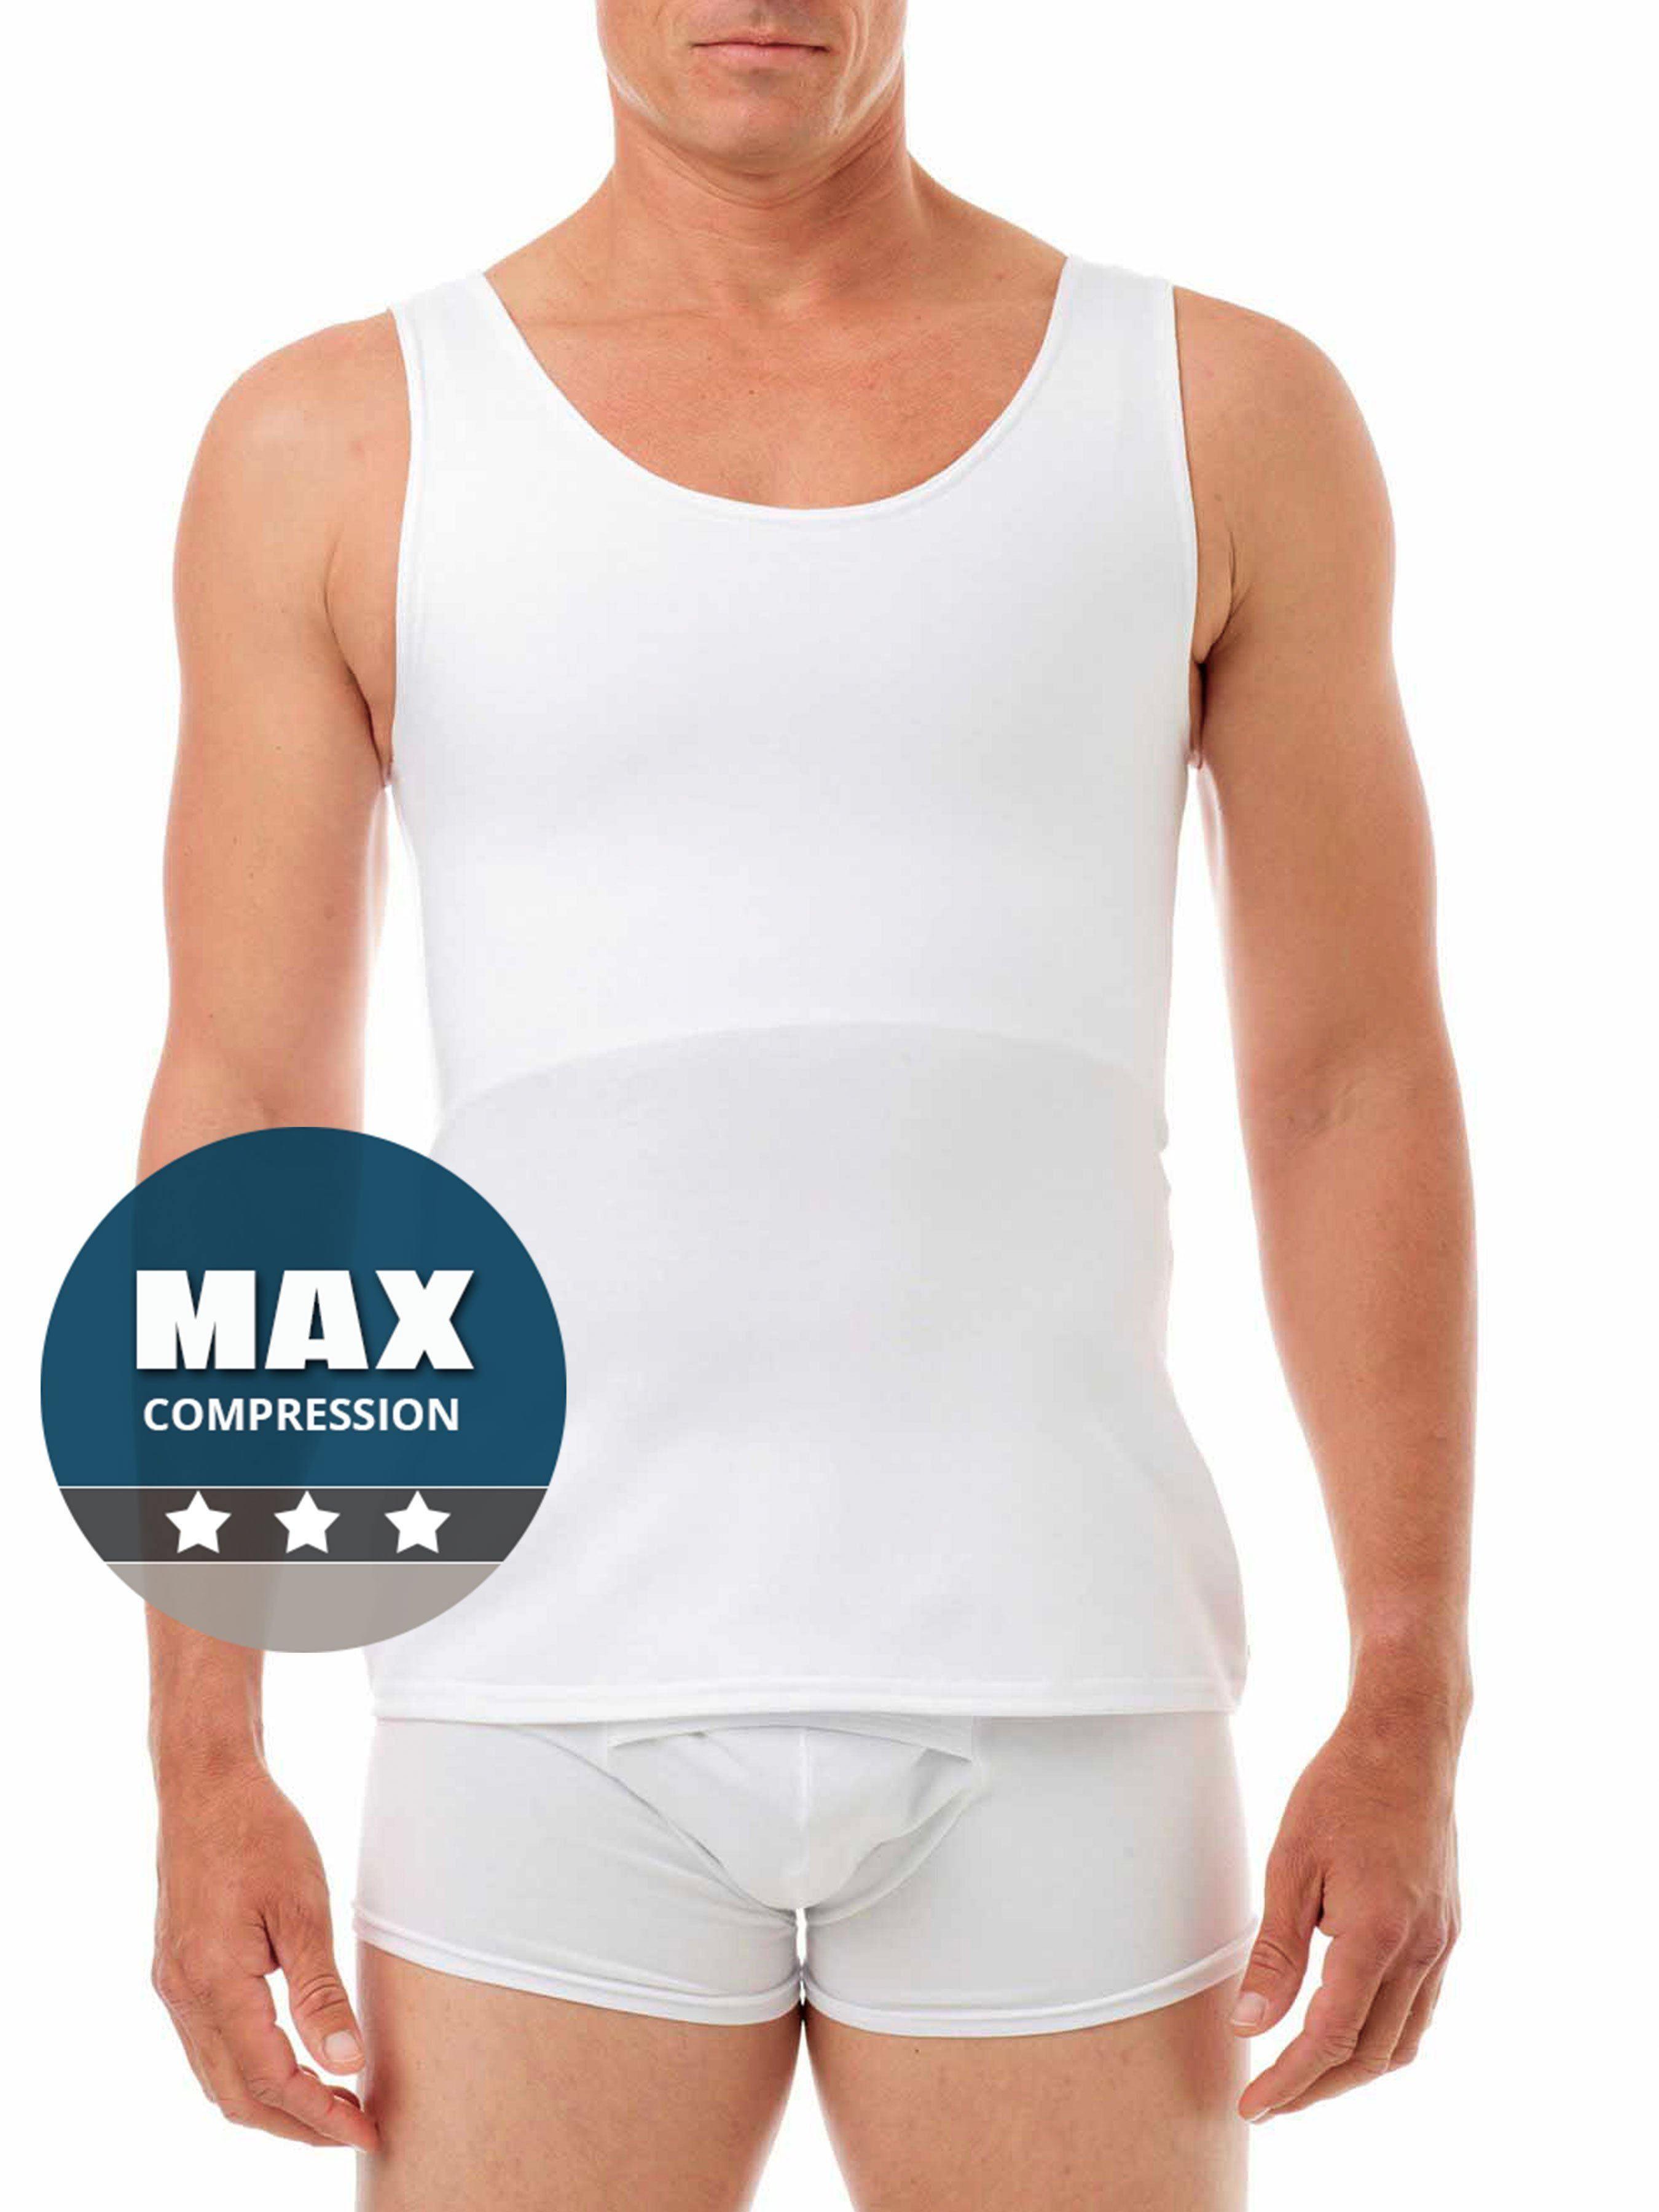 XBODY:UK Compression Vest - Chest Only